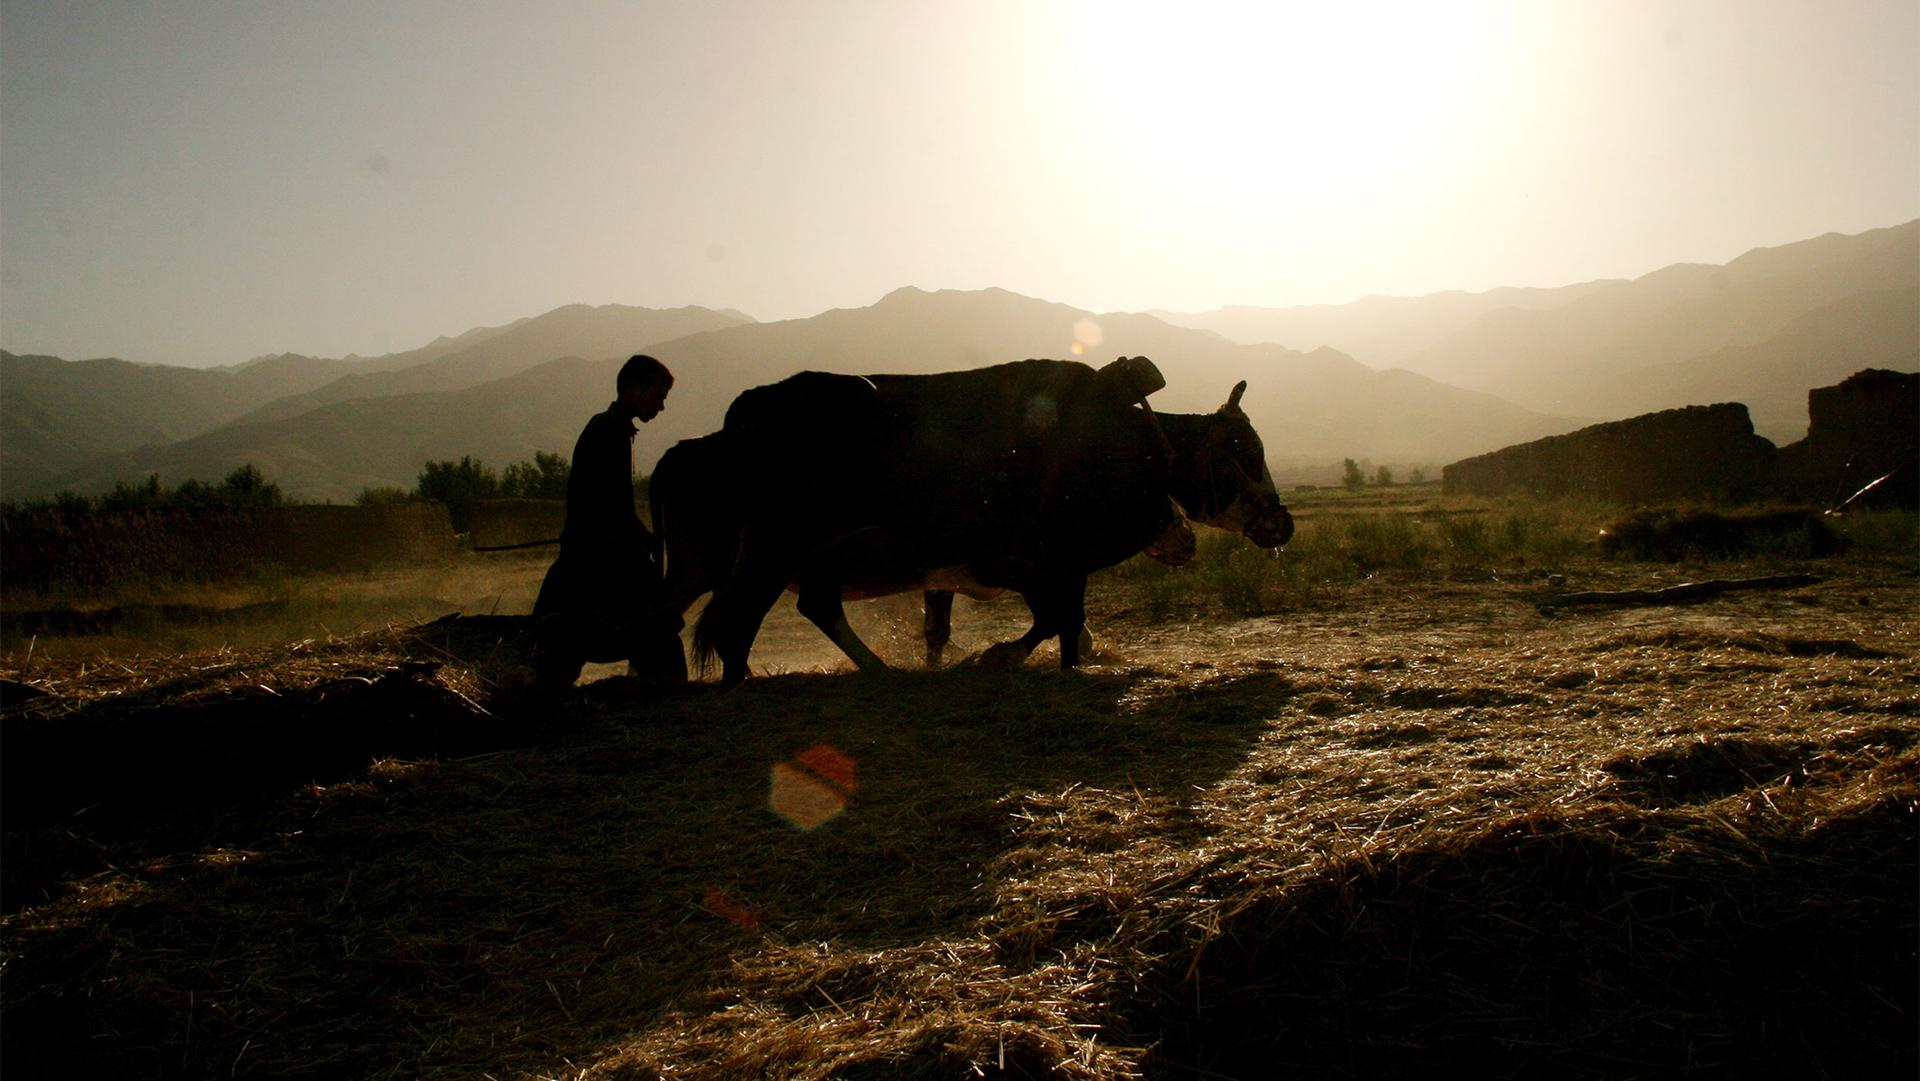 Shomali, a little north of Kabul, Afghanistan, July 18, 2005. After seven years of severe drought that impoverished farmers and made millions reliant on food handouts, Afghanistan enjoyed a bountiful harvest.